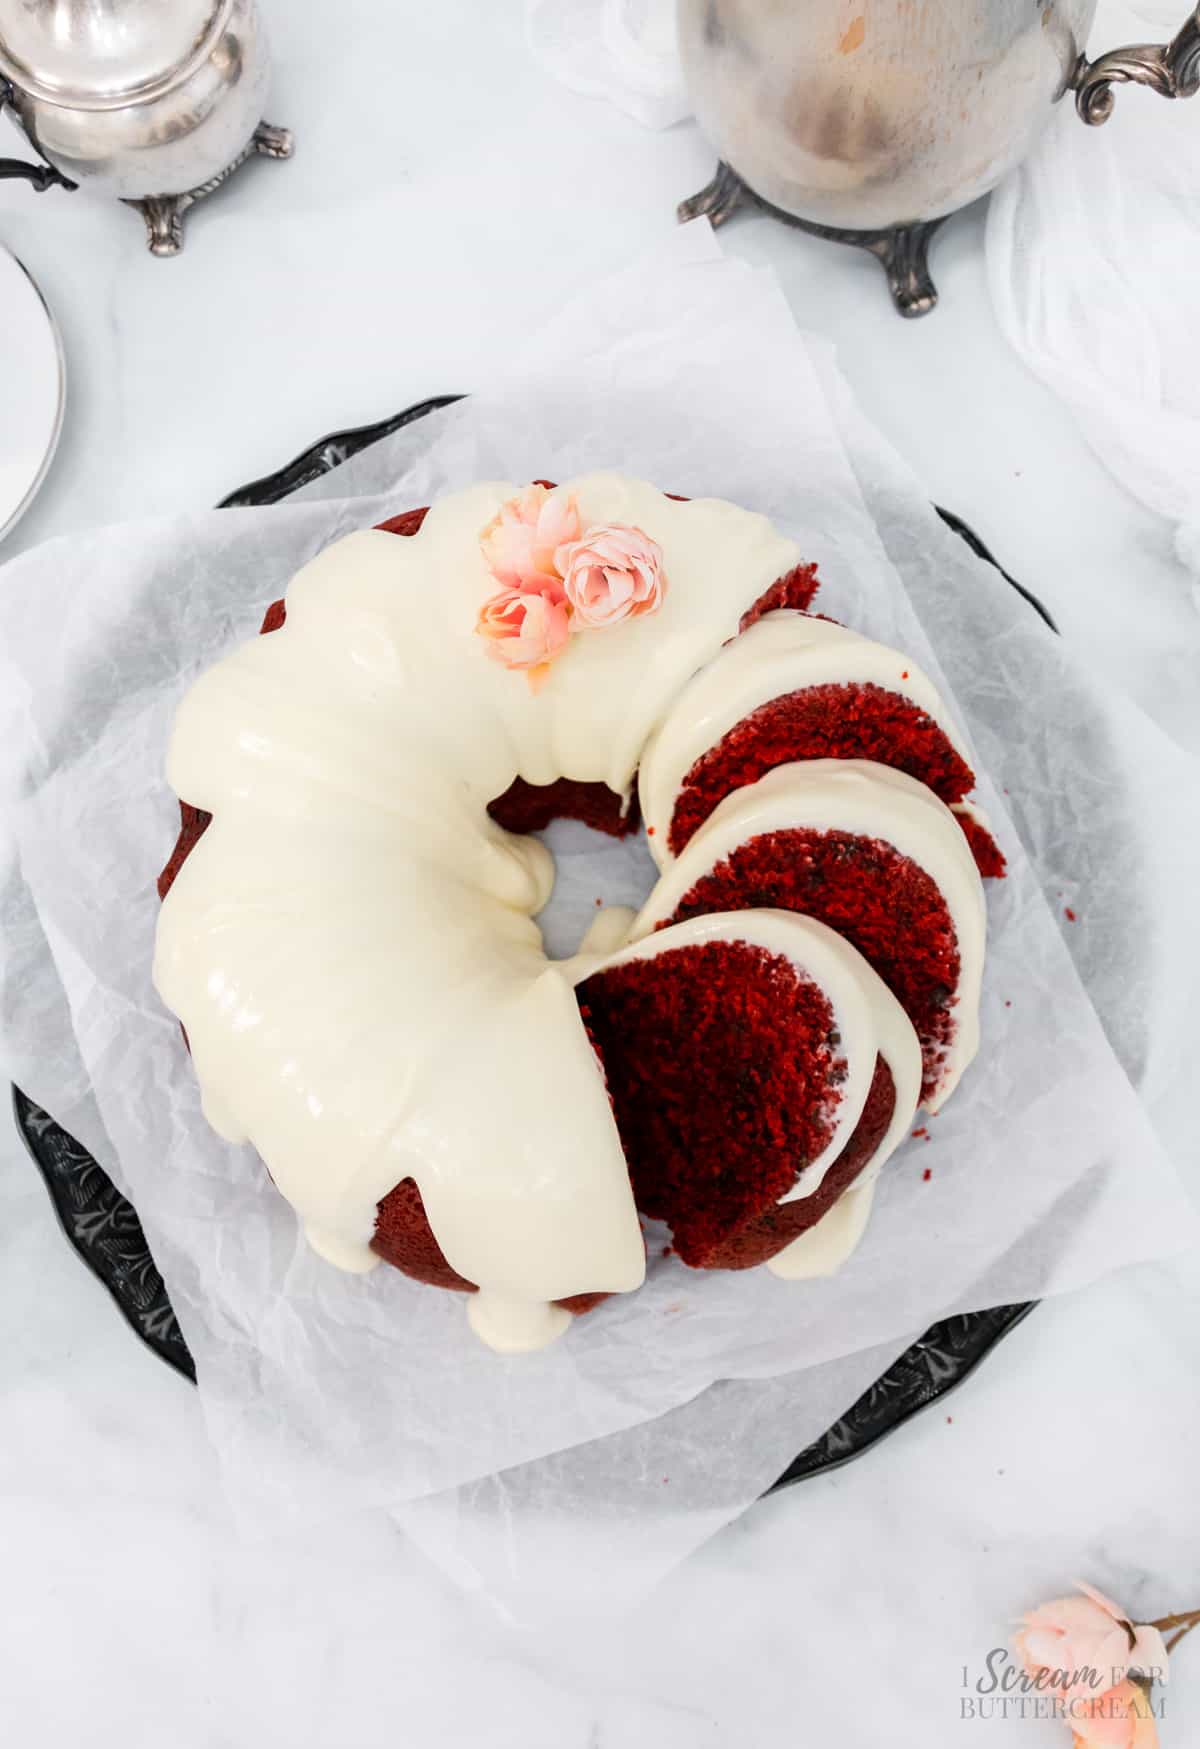 Top view of red velvet pound cake with slices cut.